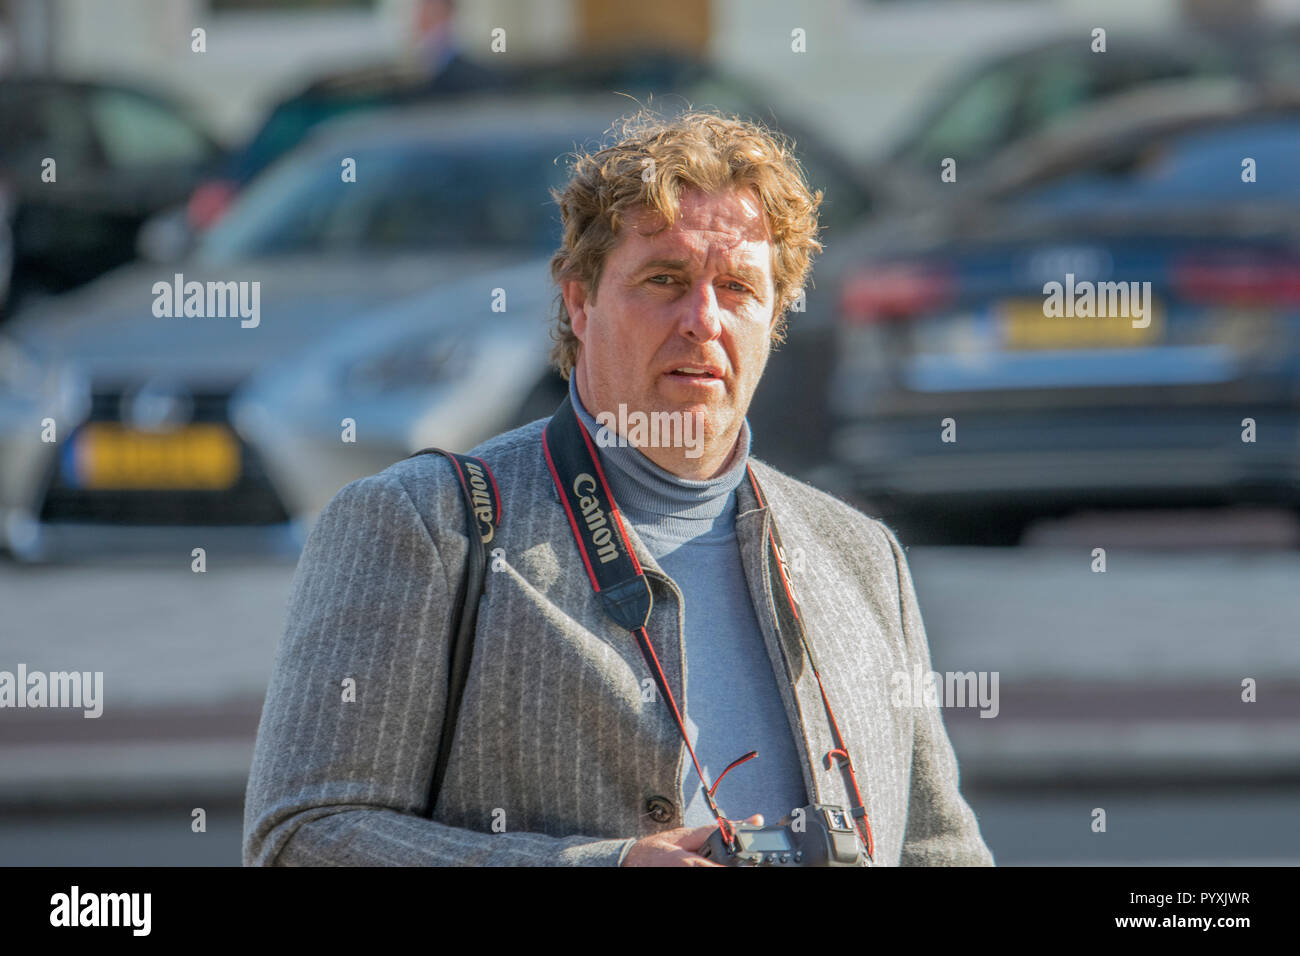 Dutch Photographer Edwin Smulders At Amsterdam The Netherlands 2018 Stock Photo